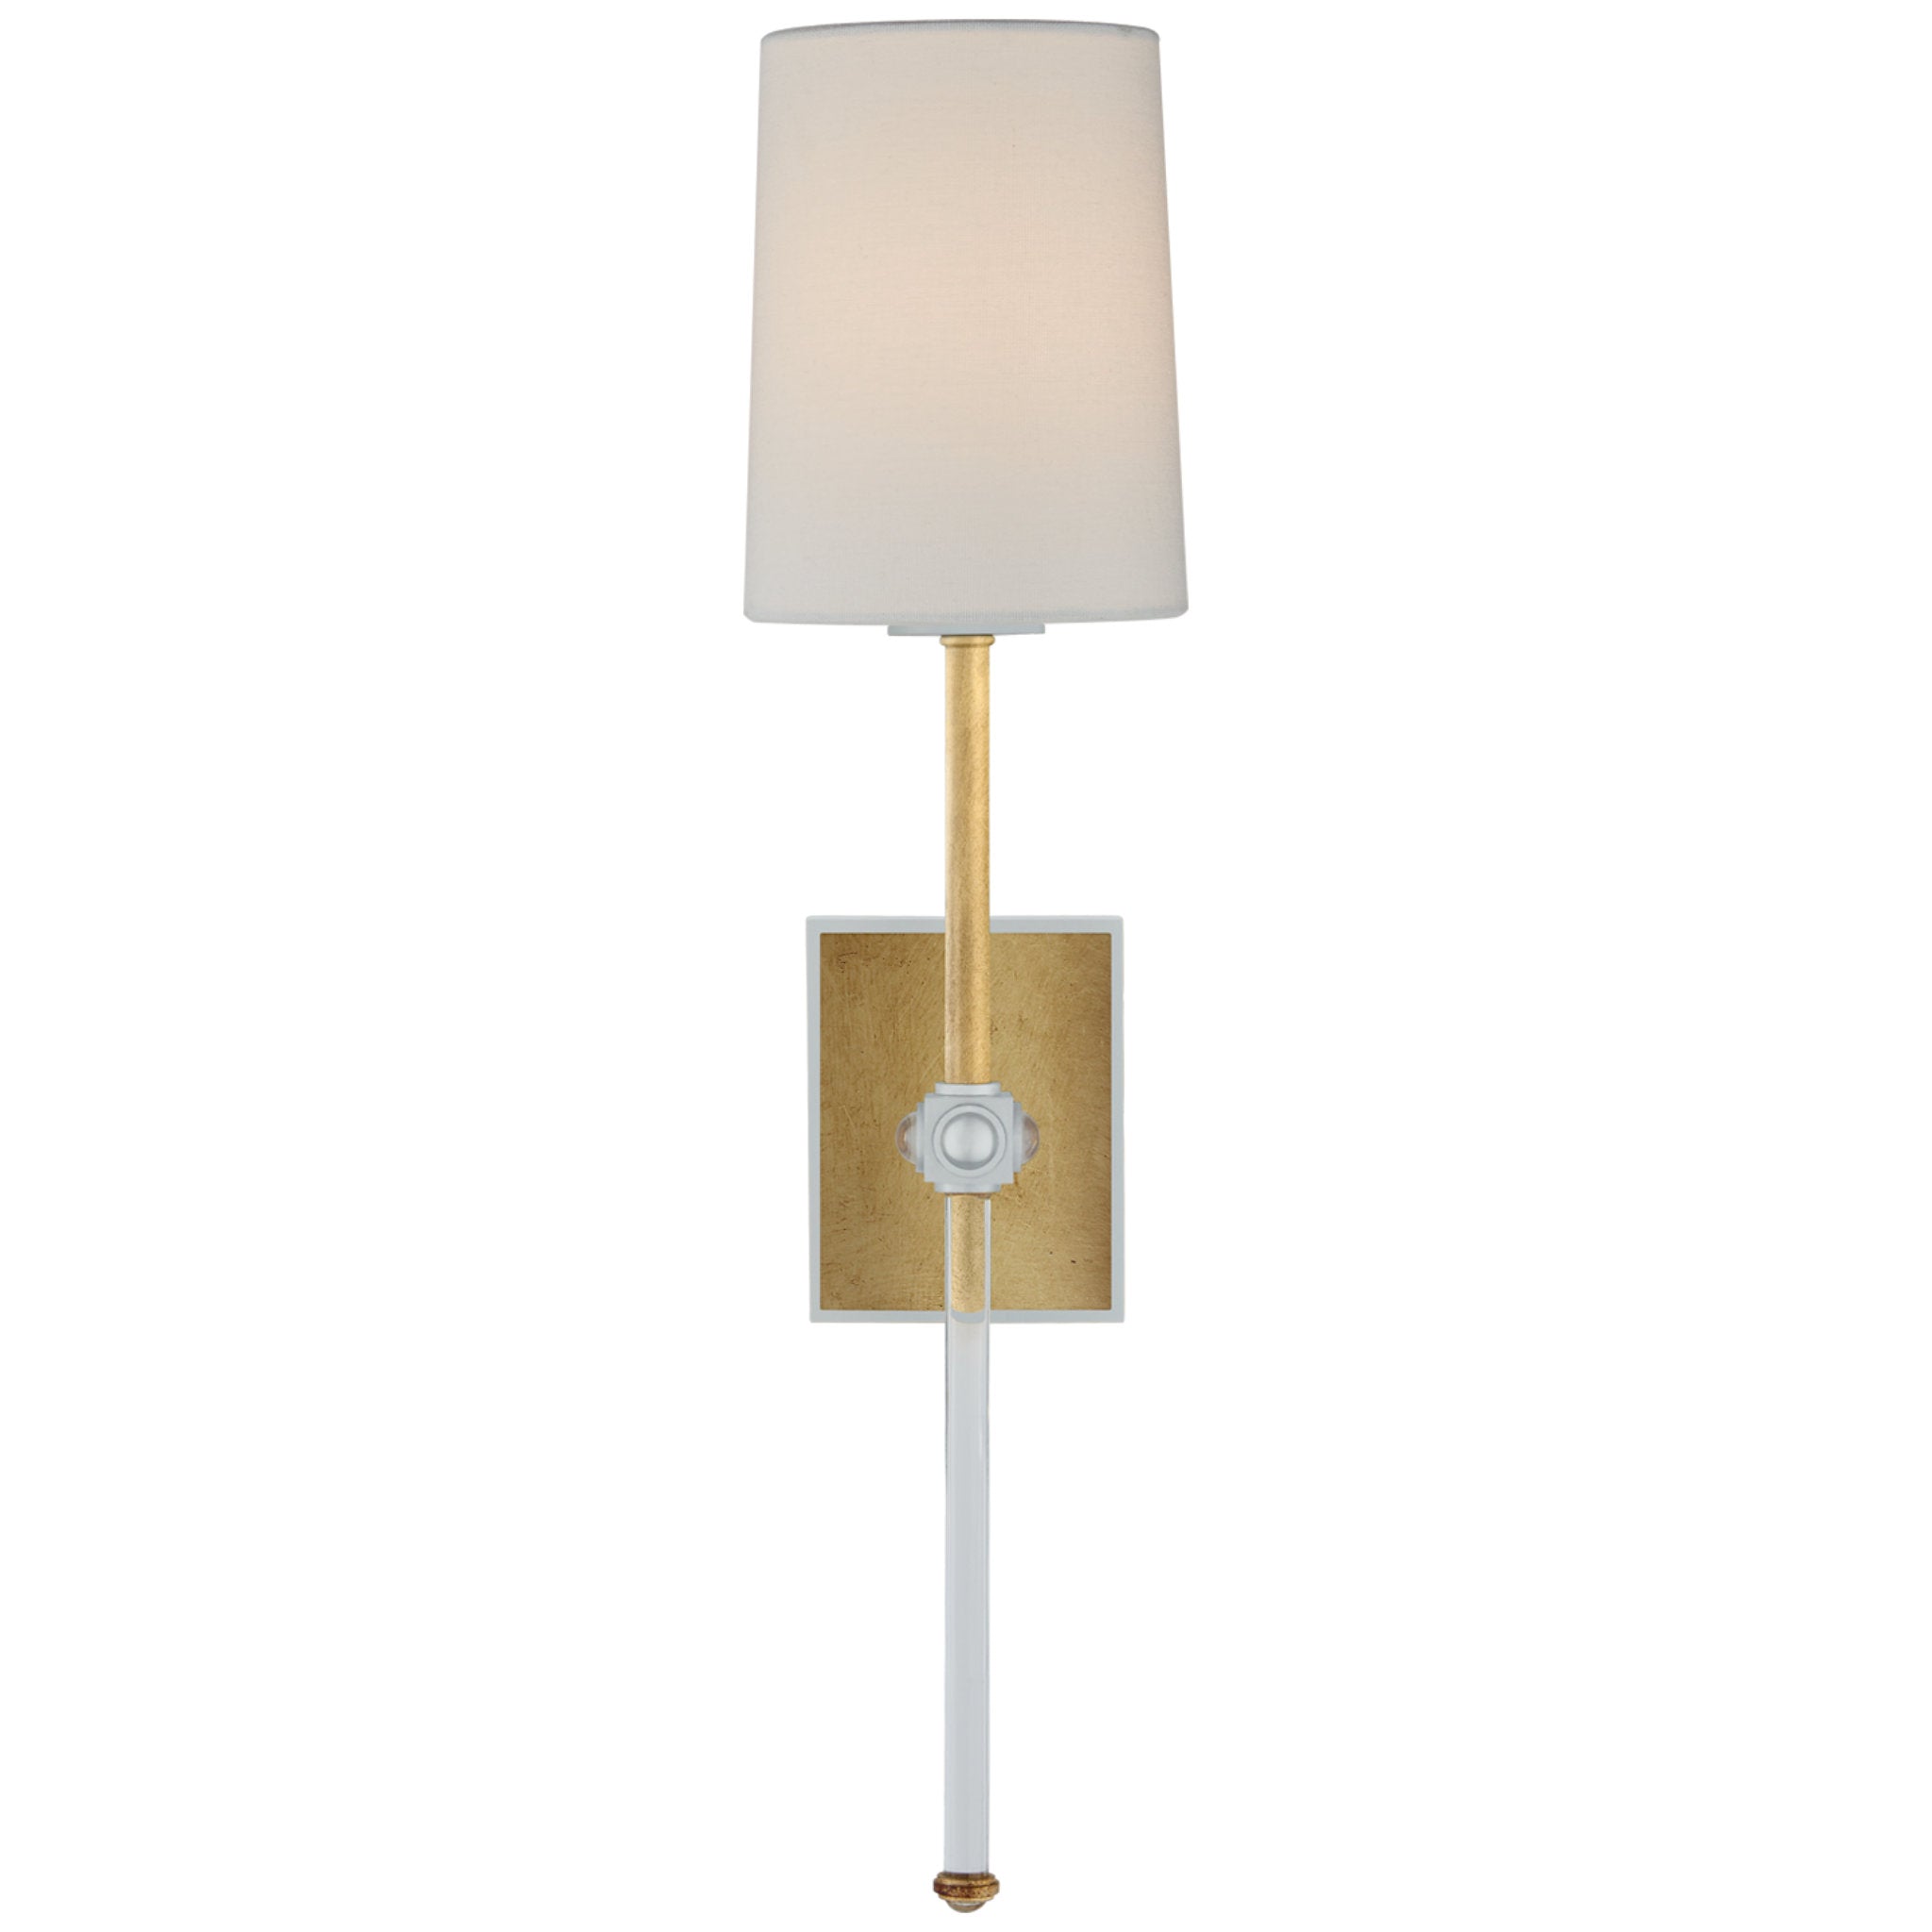 Julie Neill Lucia Medium Tail Sconce in Gild and Crystal with Linen Shade